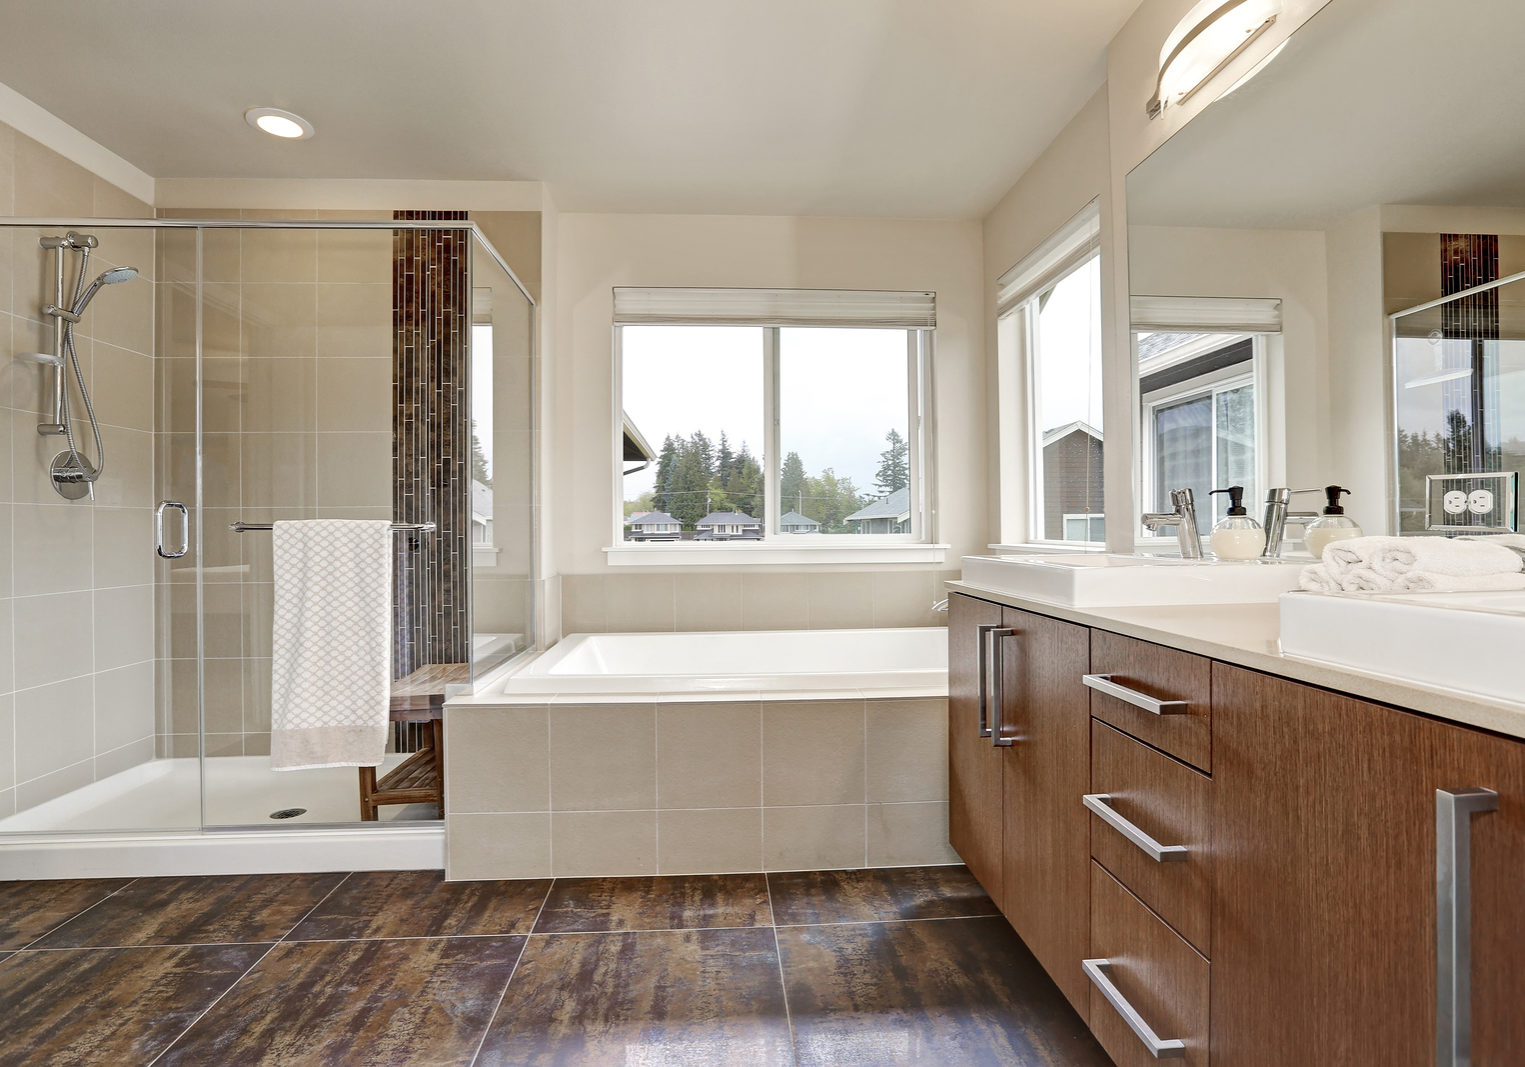 White modern bathroom interior in brand-new house. Double sink vanity with large mirror walk-in shower white bath tub and brown tile floor. Northwest USA